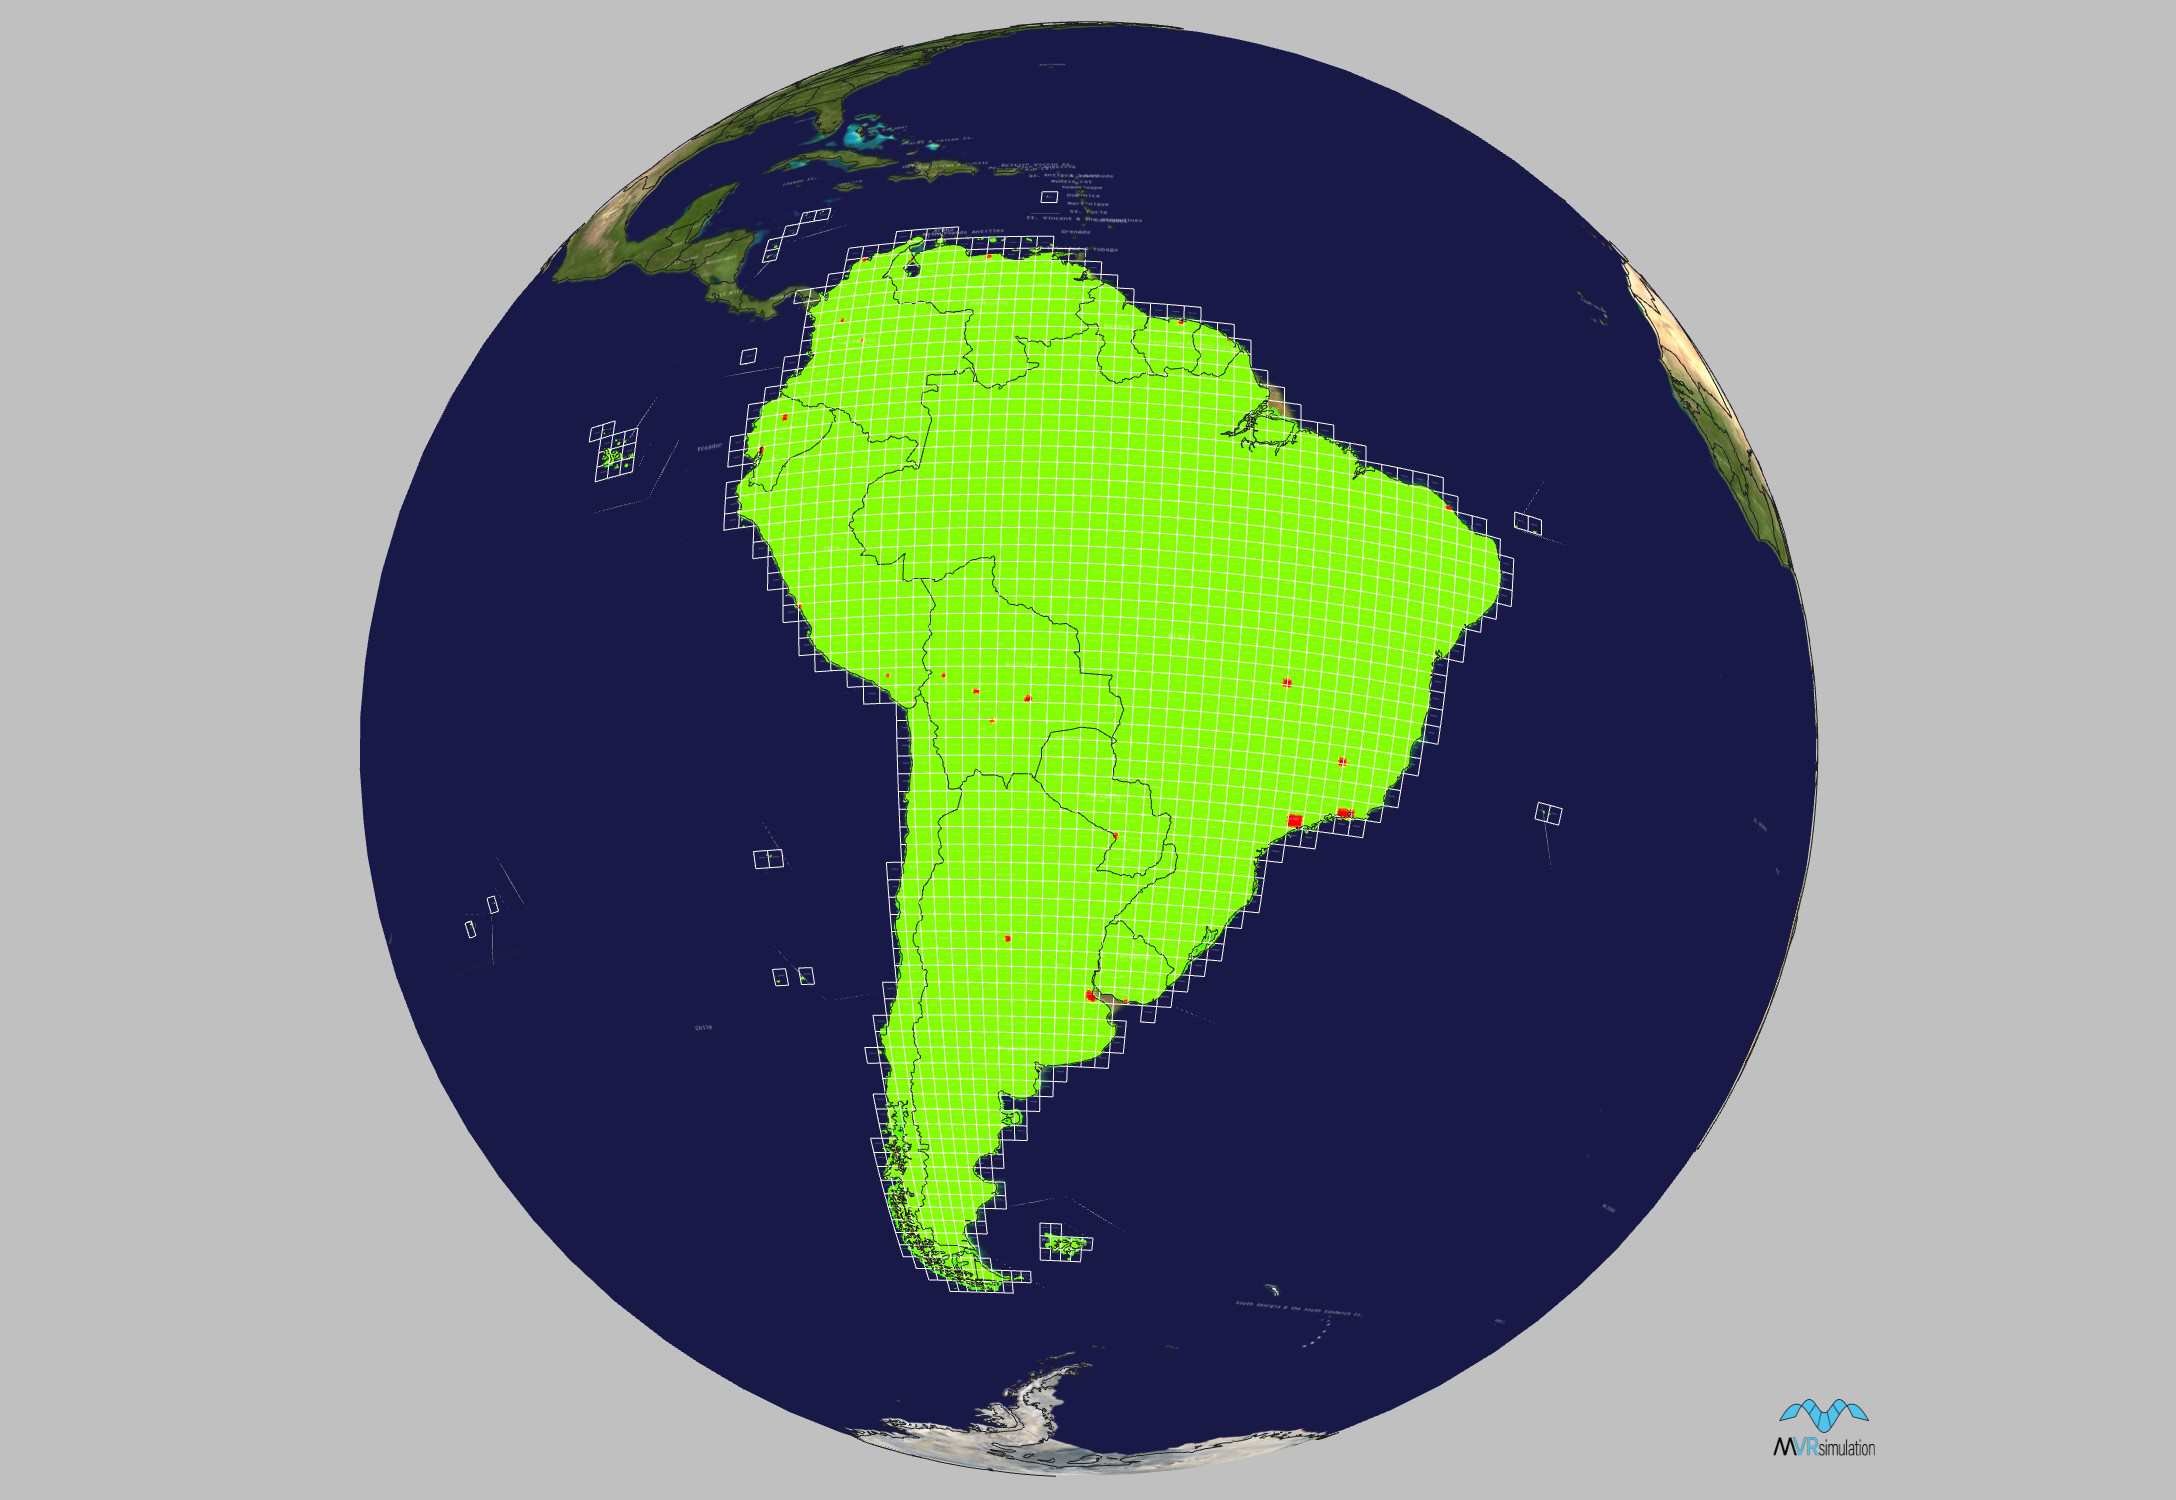 Geographic coverage of MetaVR terrain tiles of South America.